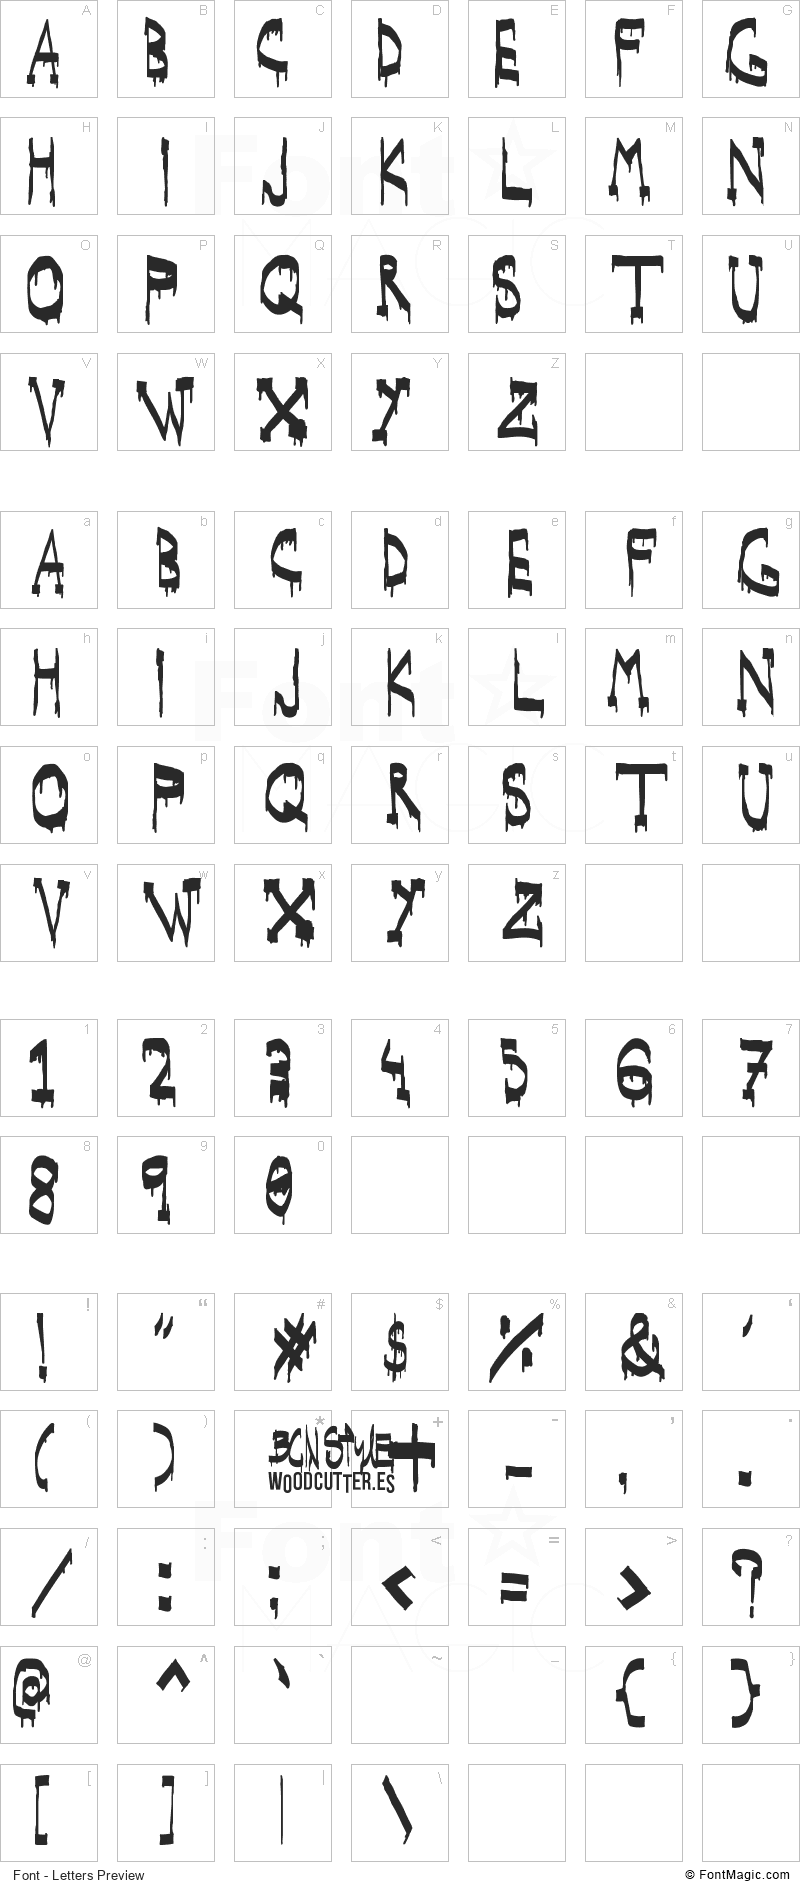 Woodcutter BCN Style Font - All Latters Preview Chart